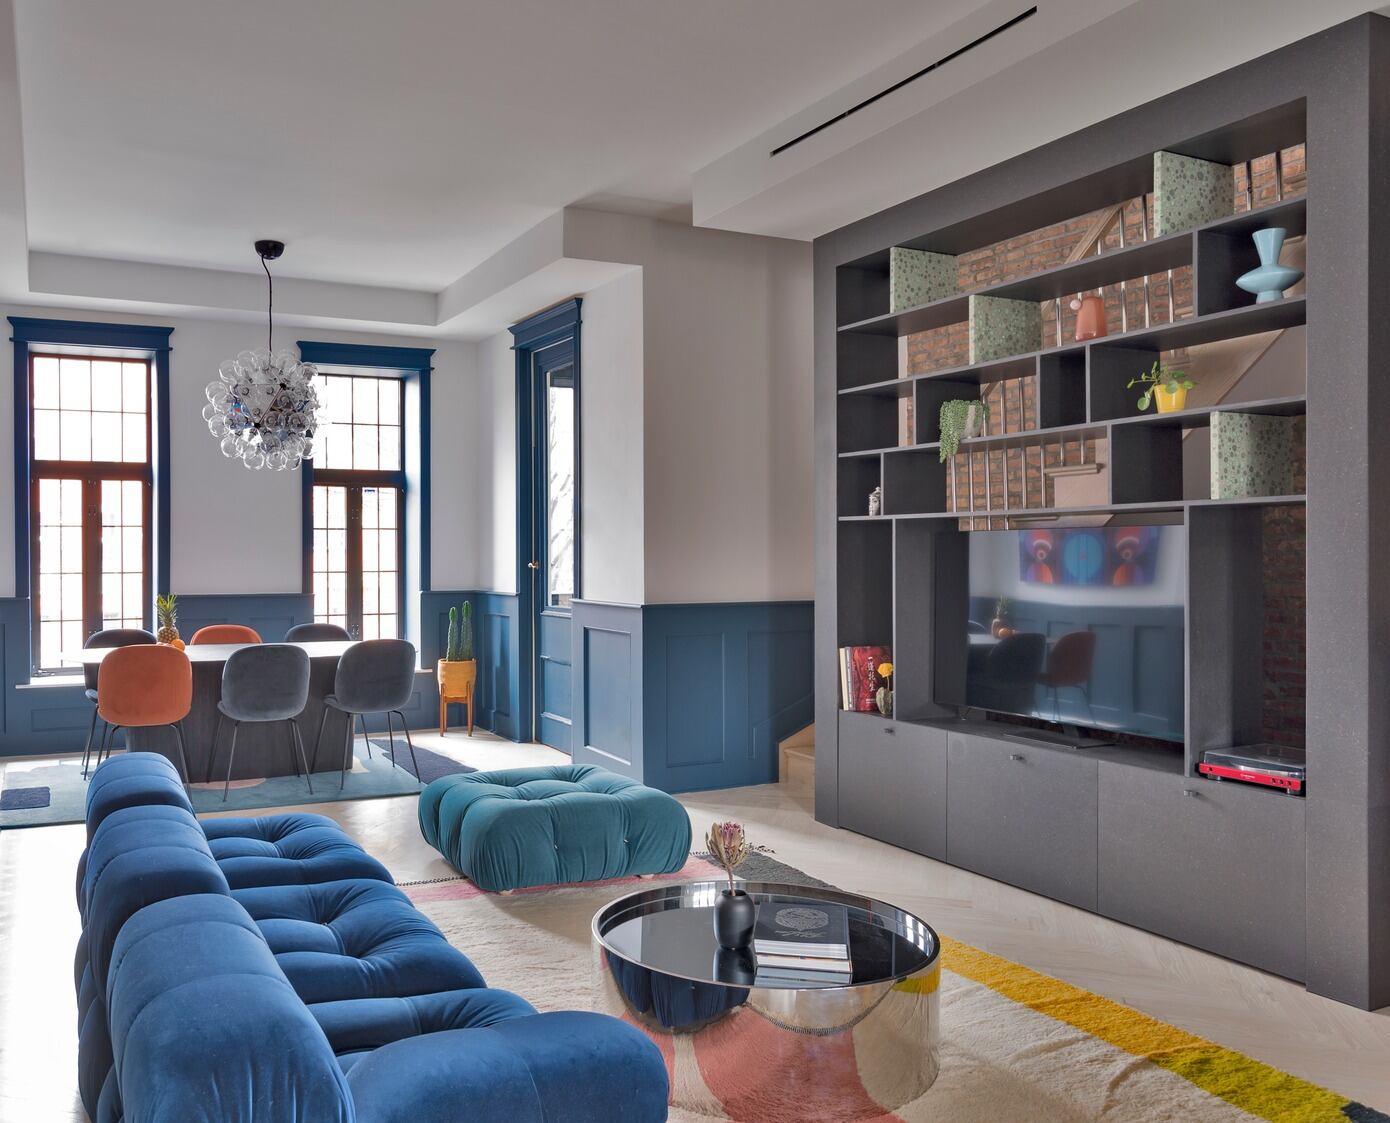 Bed-Stuy Townhouse: Reinventing Brooklyn Chic